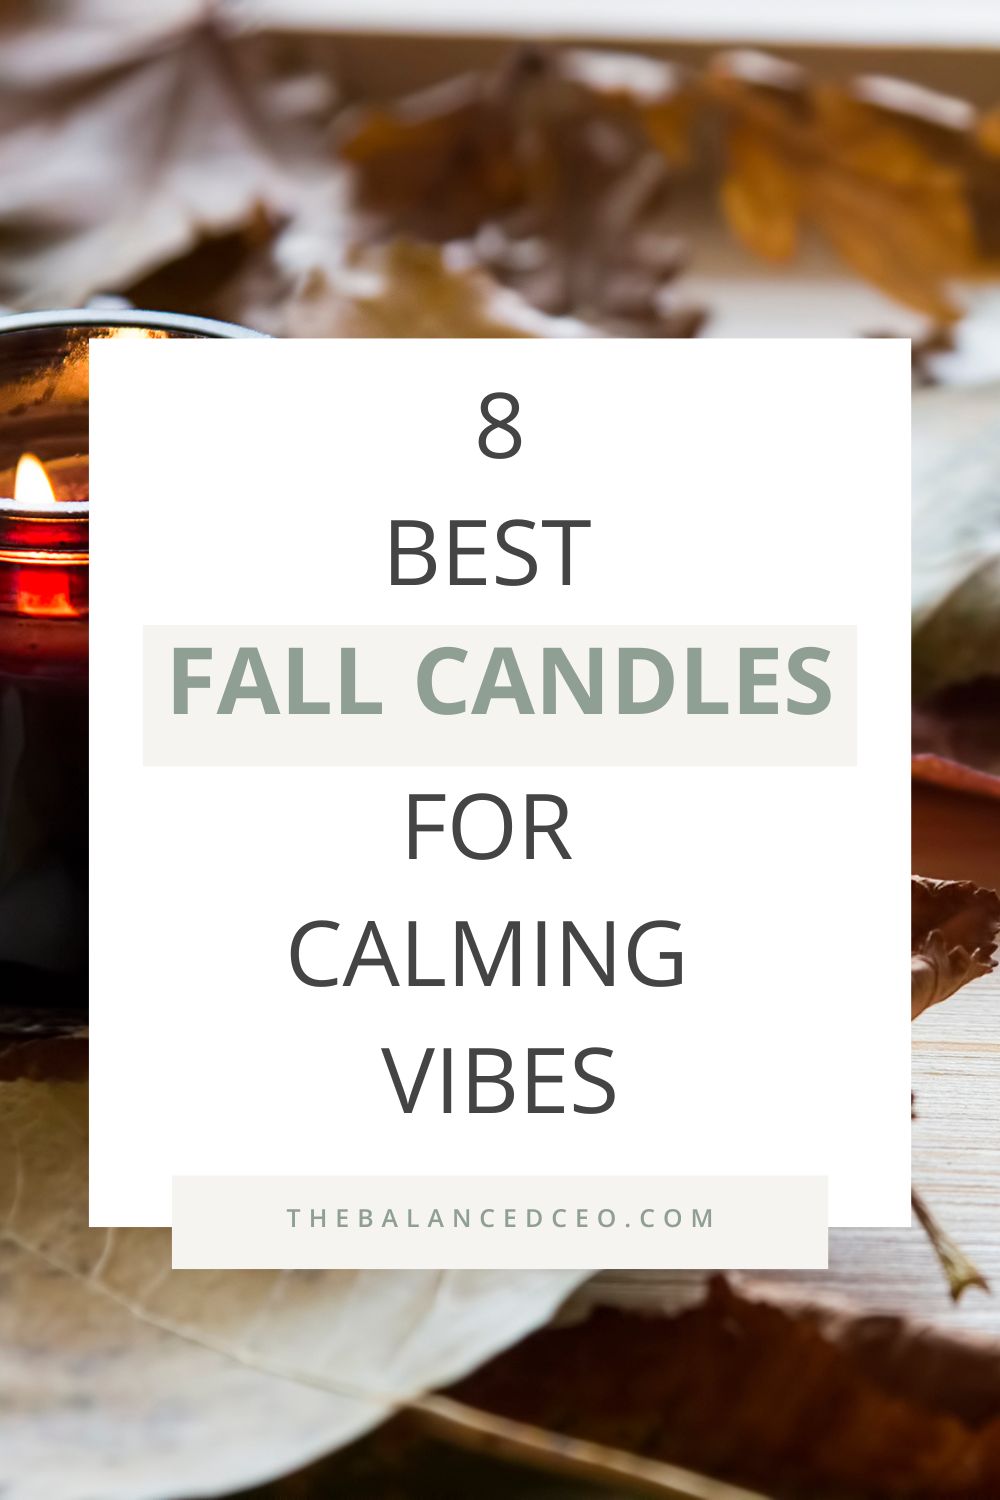 8 Best Fall Candles for Calming Vibes